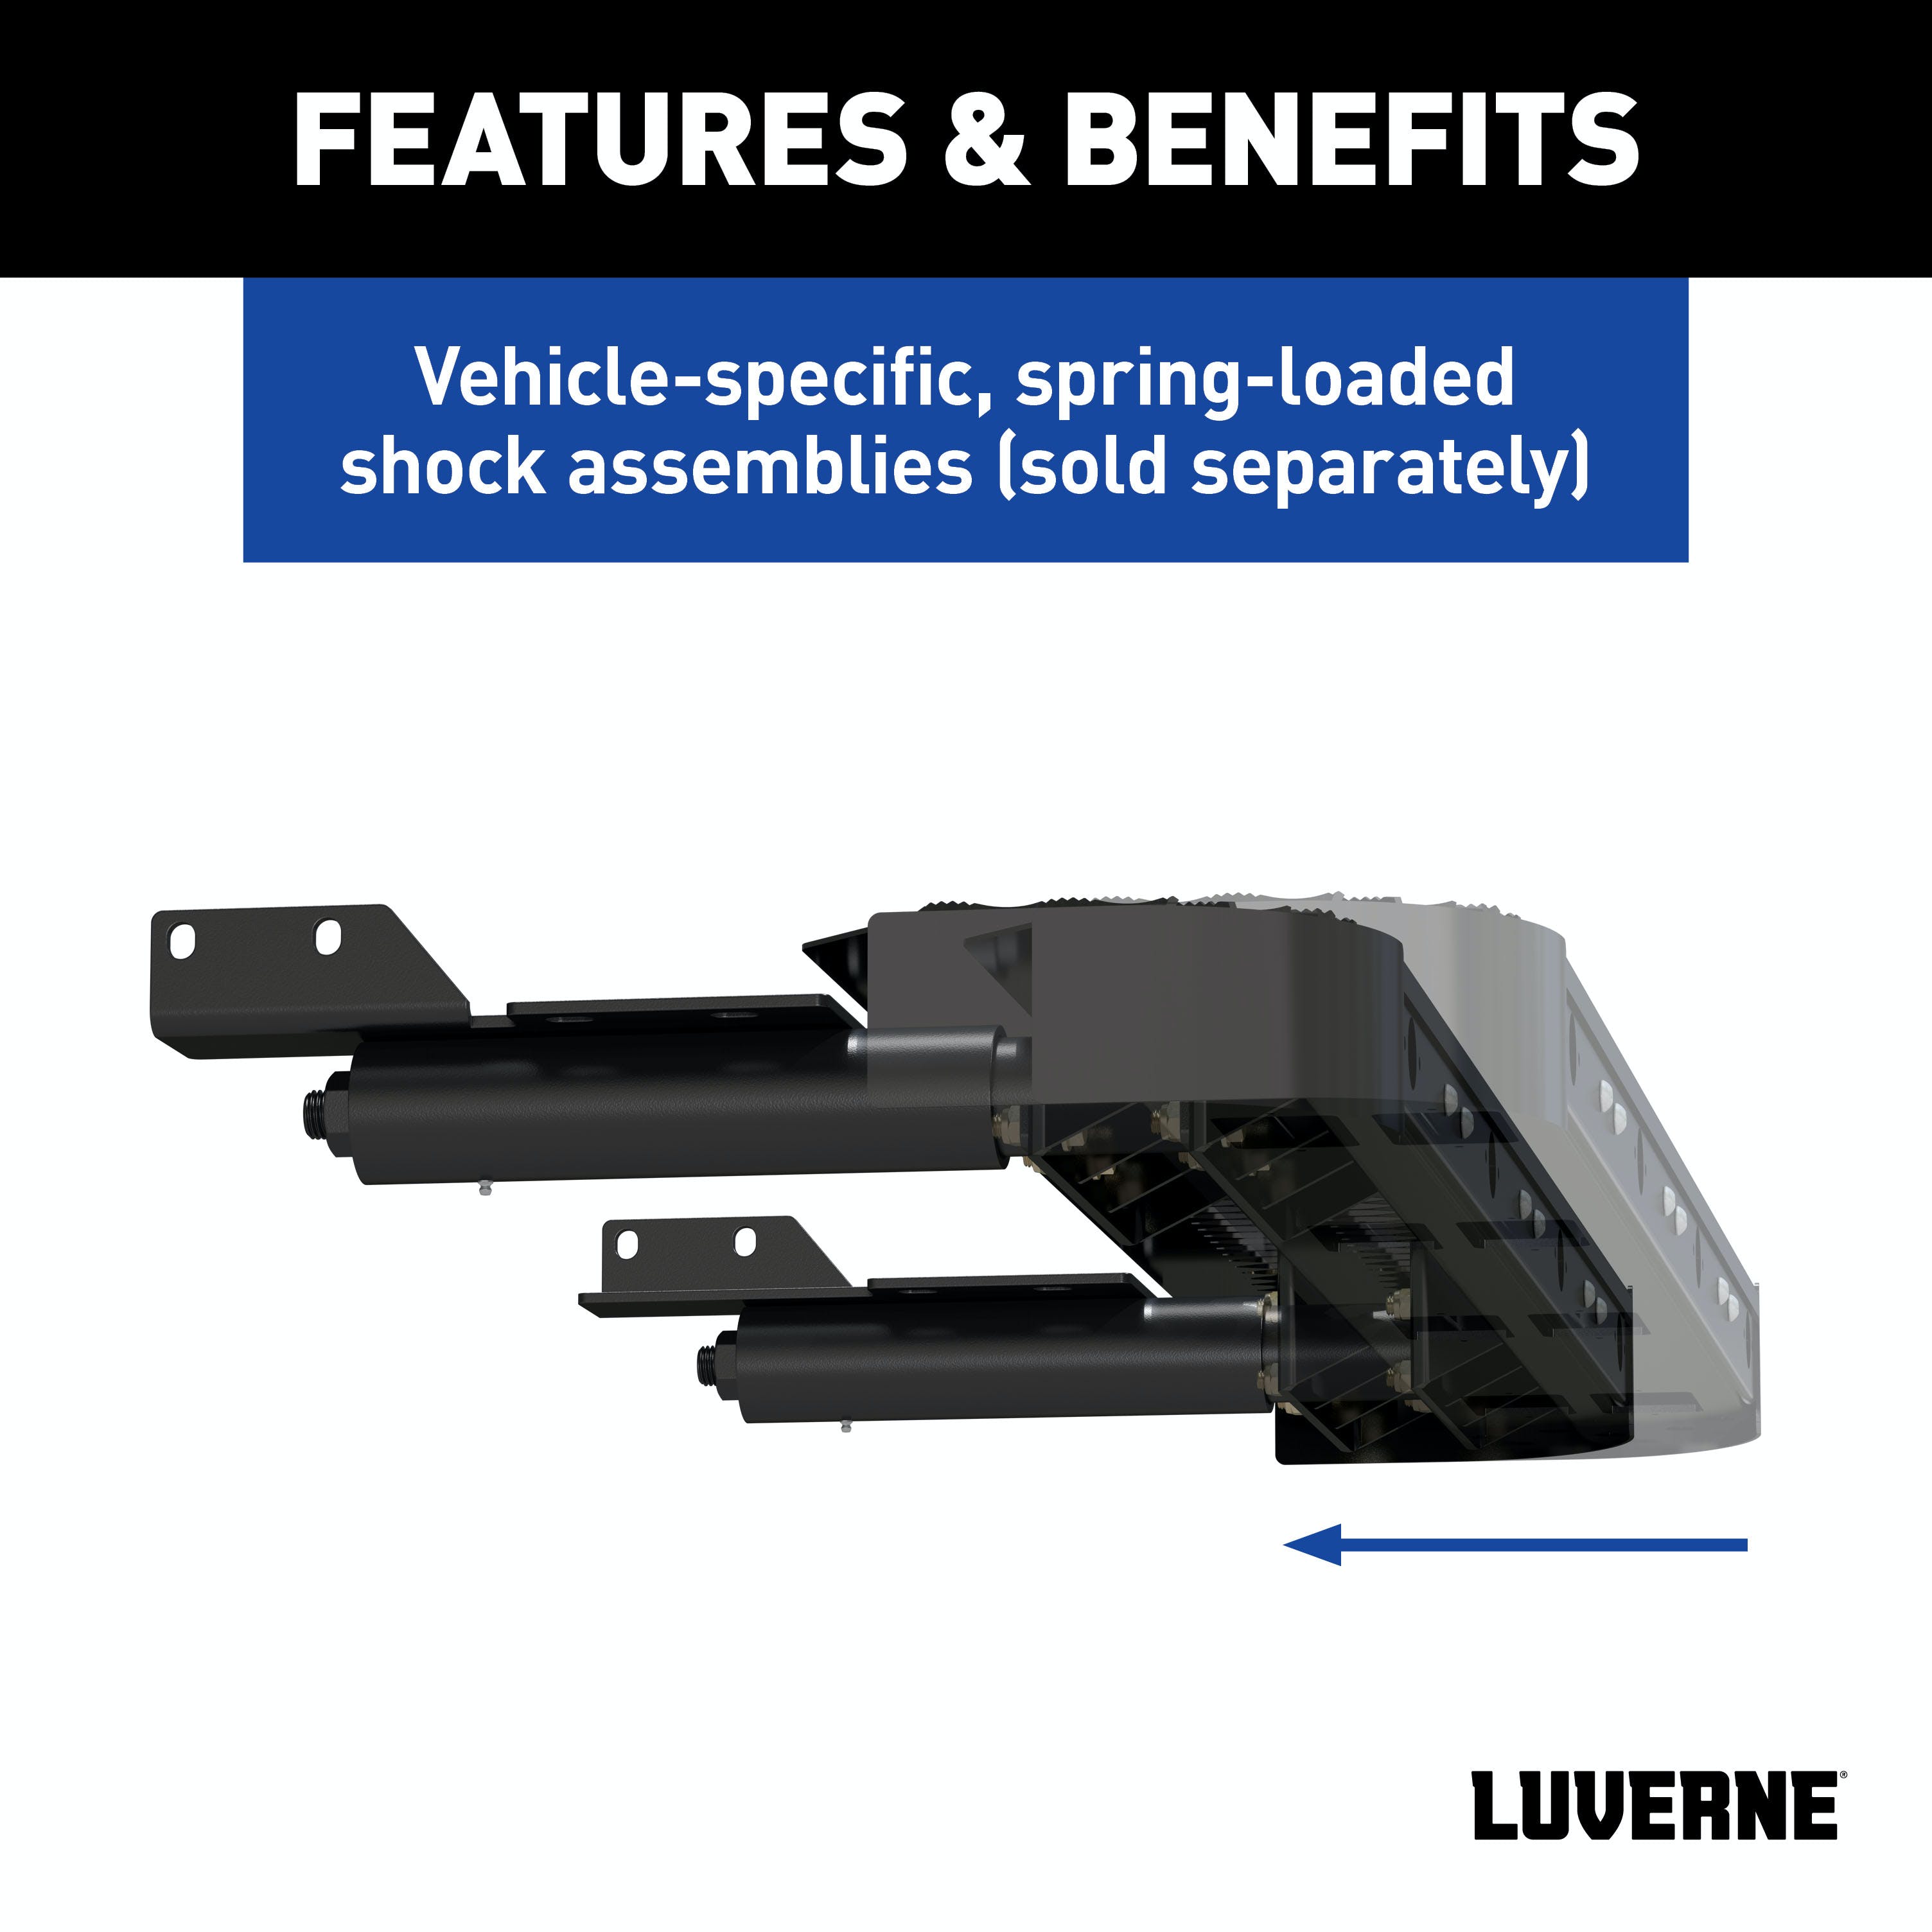 LUVERNE 415358-571500 Impact Shock-Absorbing Rear Bumper Guard and Step